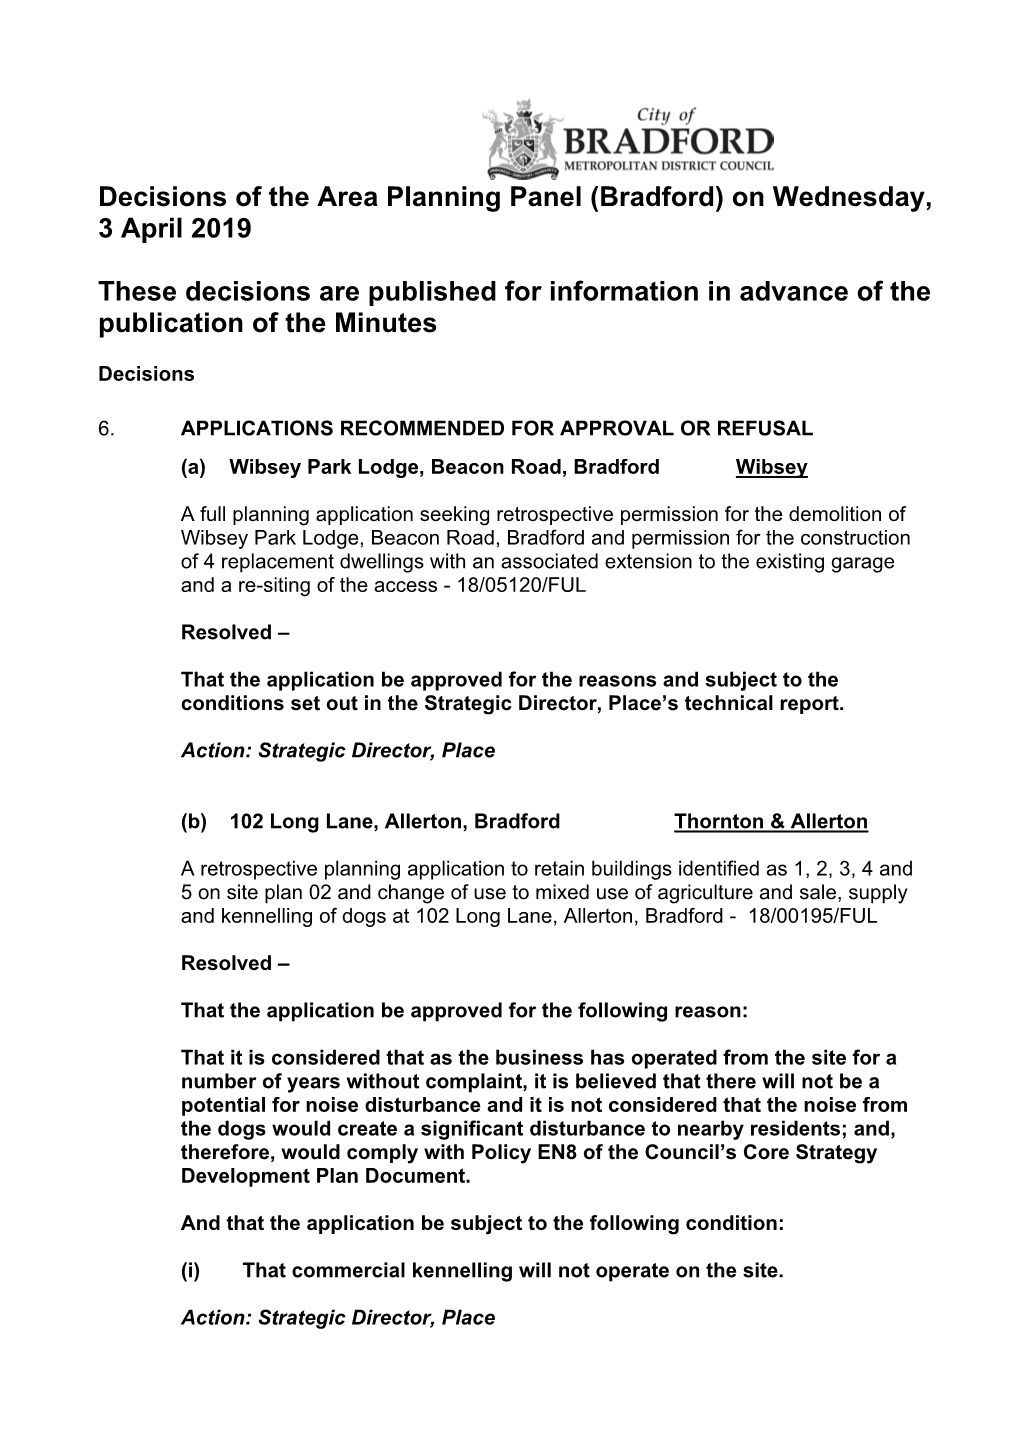 Decisions of the Area Planning Panel (Bradford) on Wednesday, 3 April 2019 These Decisions Are Published for Information in Adva